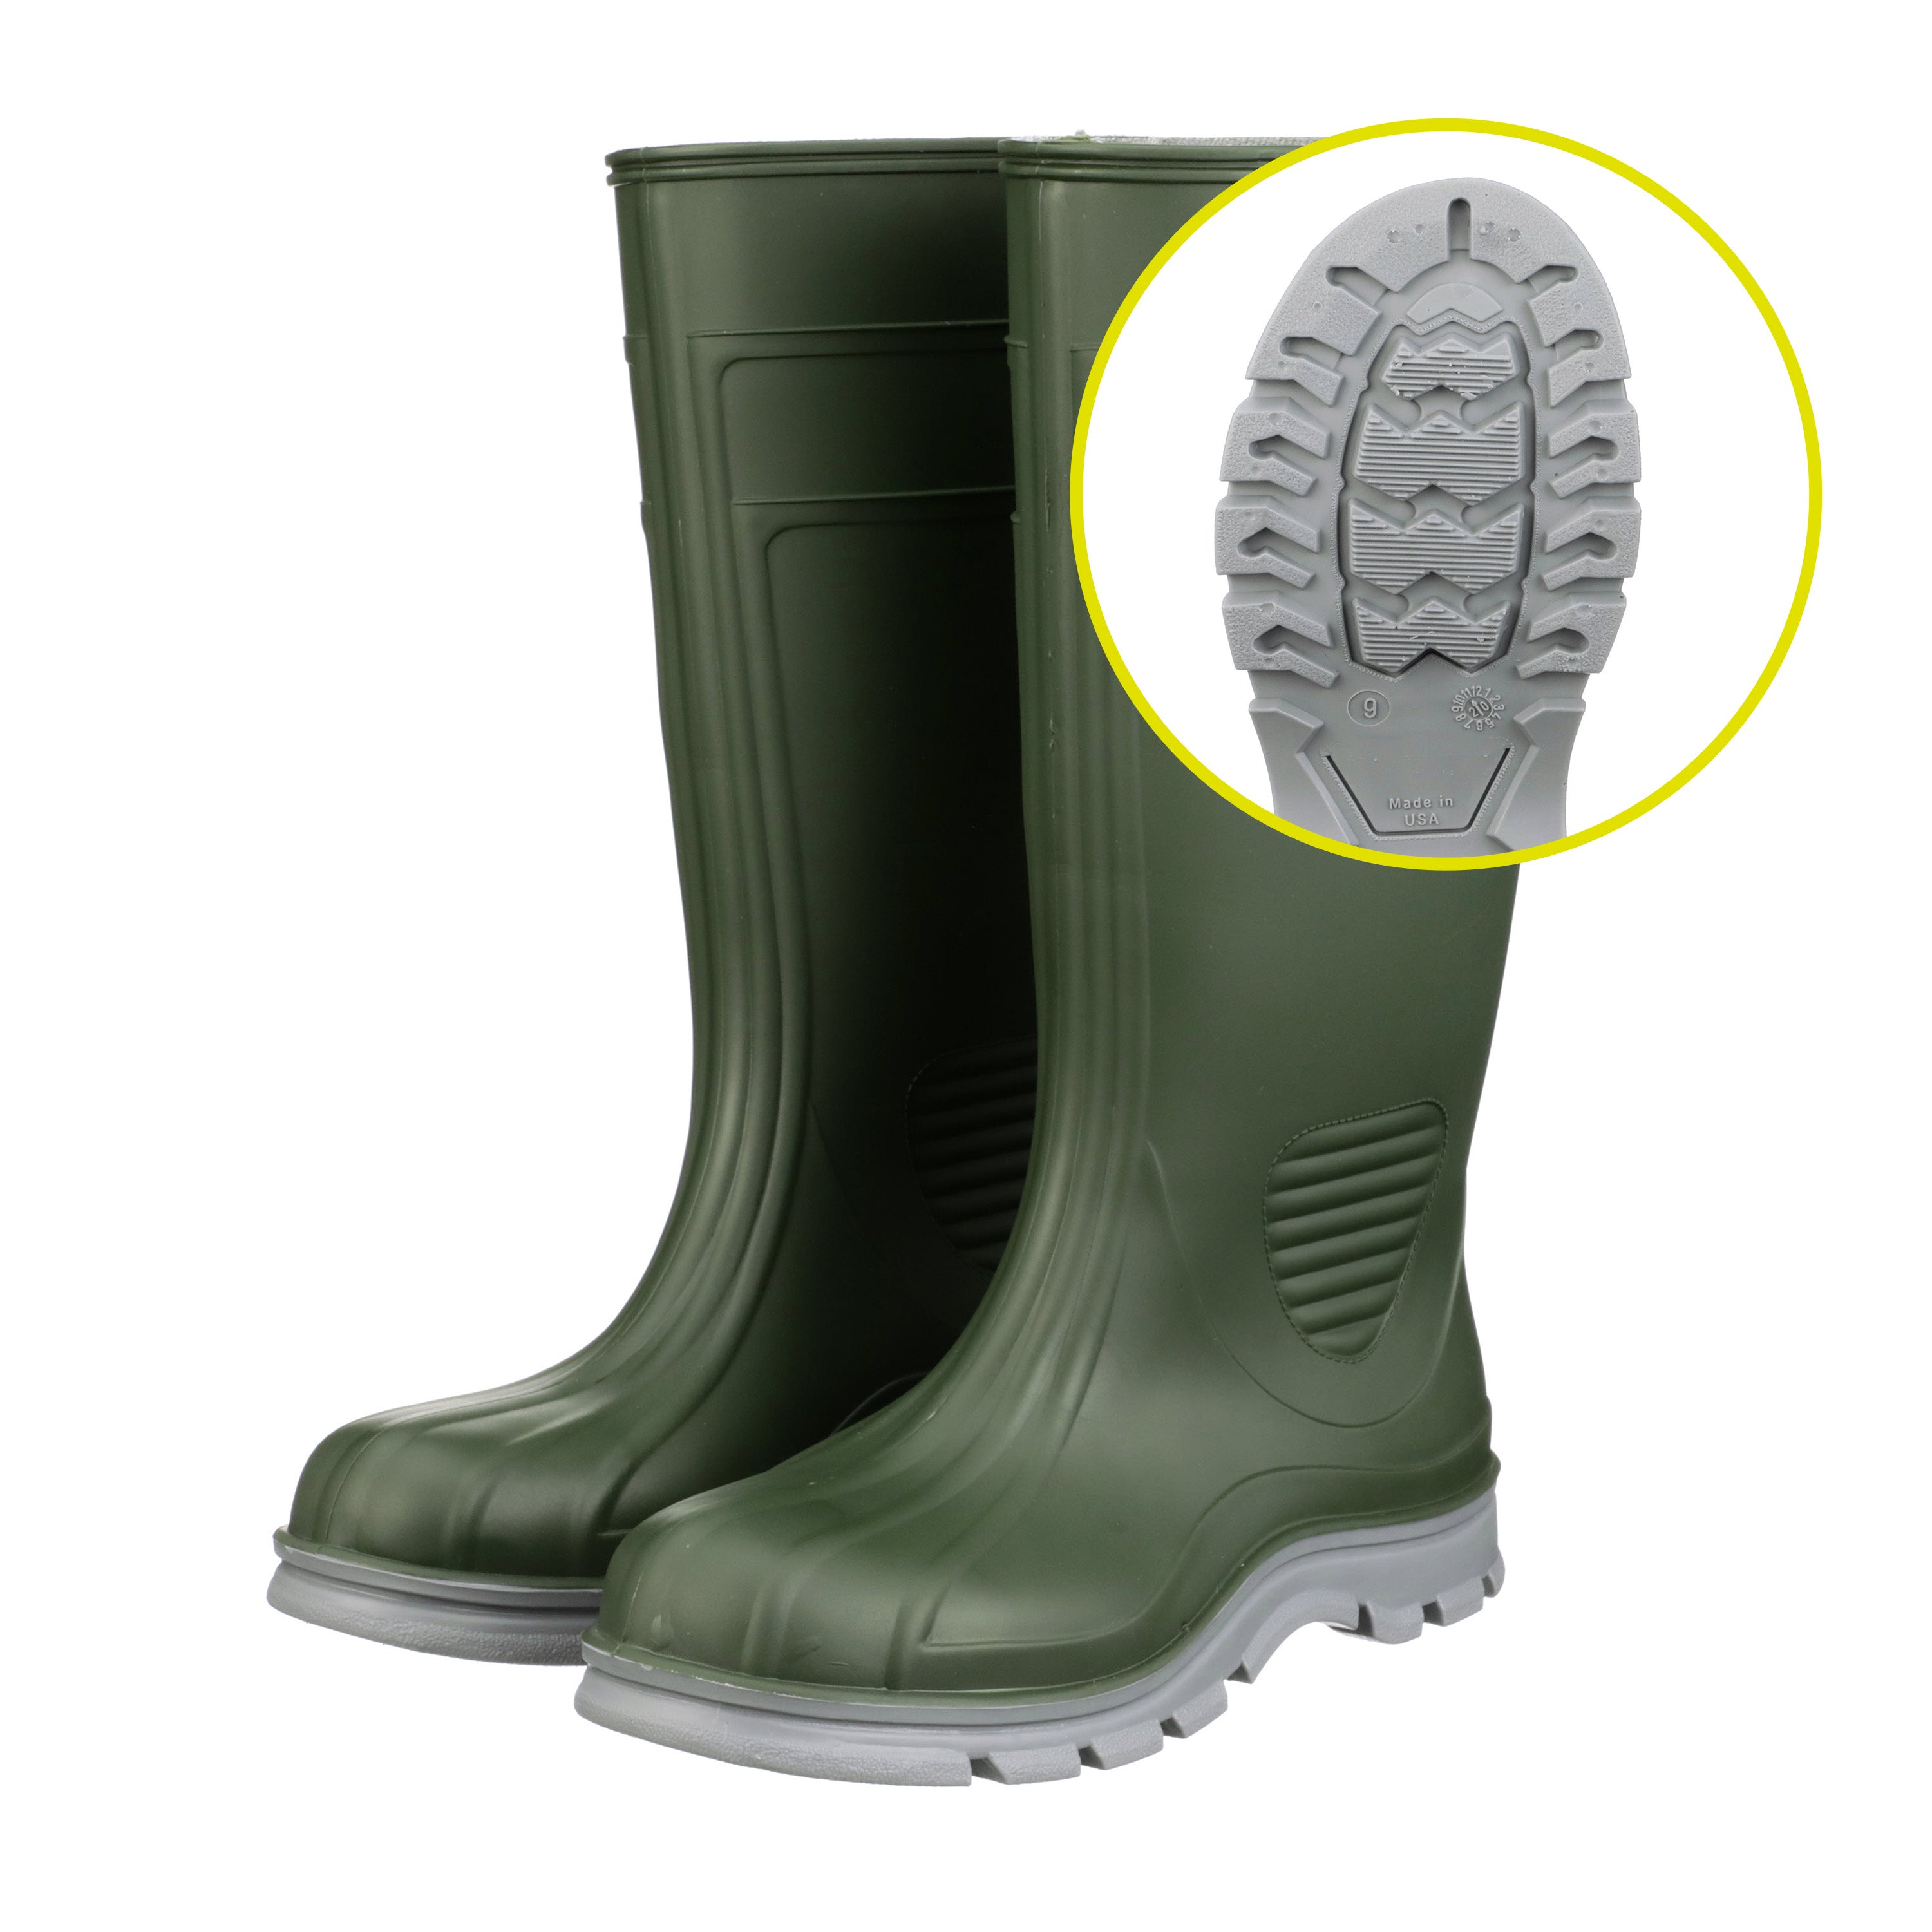 Men's Canadian-made Waterproof Fishing/Rain Boots with Non-Slip Outsole,  Green